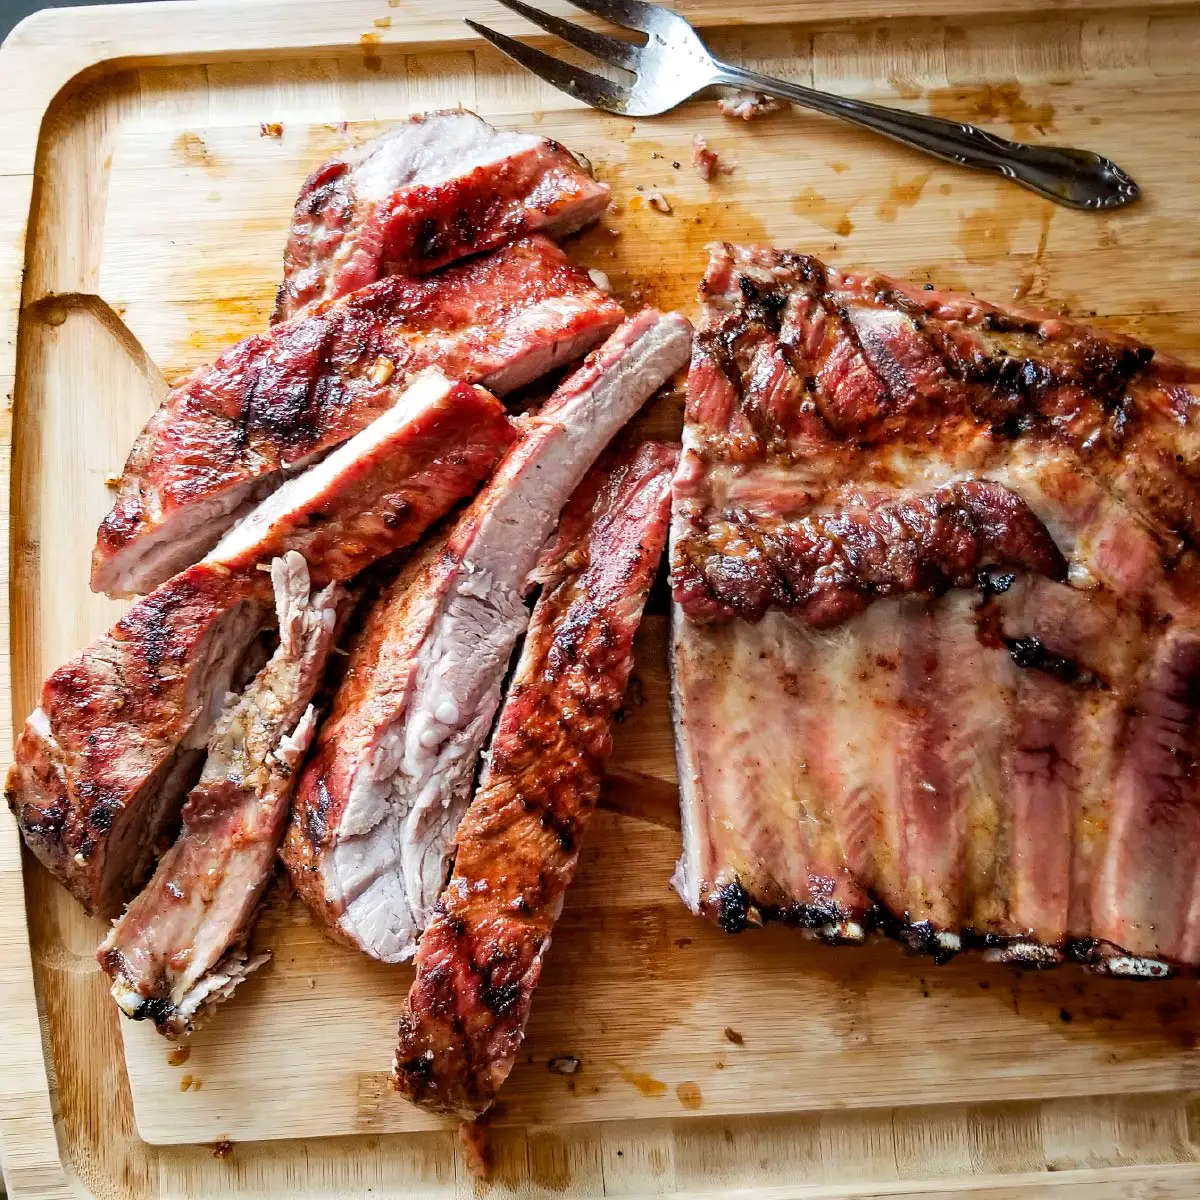 A rack of ribs cooked with a few ribs cut off ready to serve.